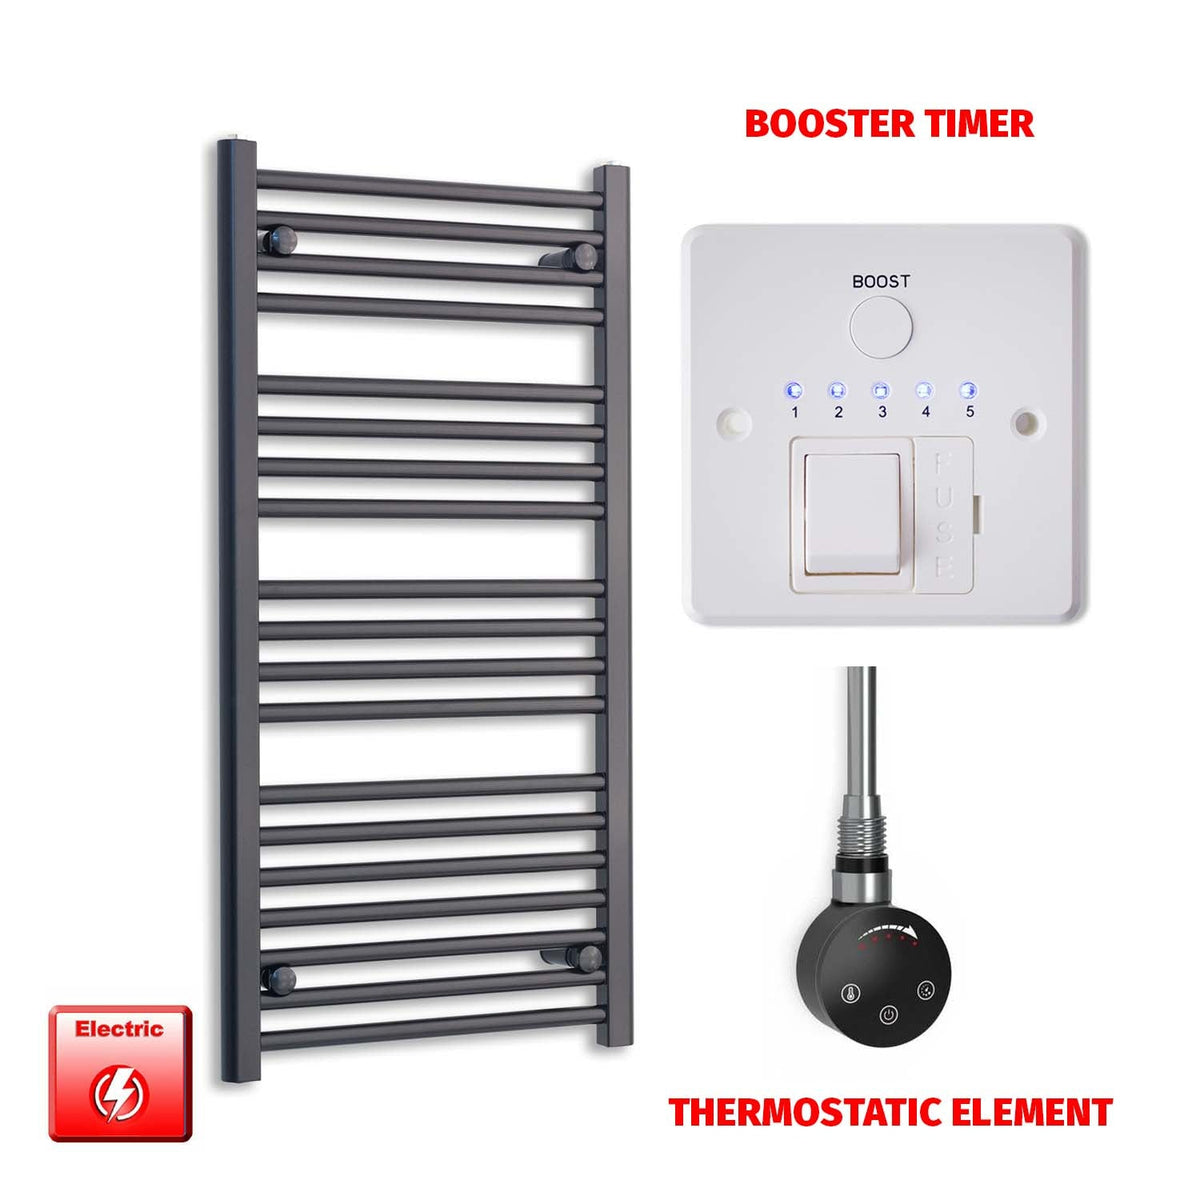 1000 x 550mm Wide Flat Black Pre-Filled Electric Heated Towel Radiator HTR SMART Thermostatic Booster Timer